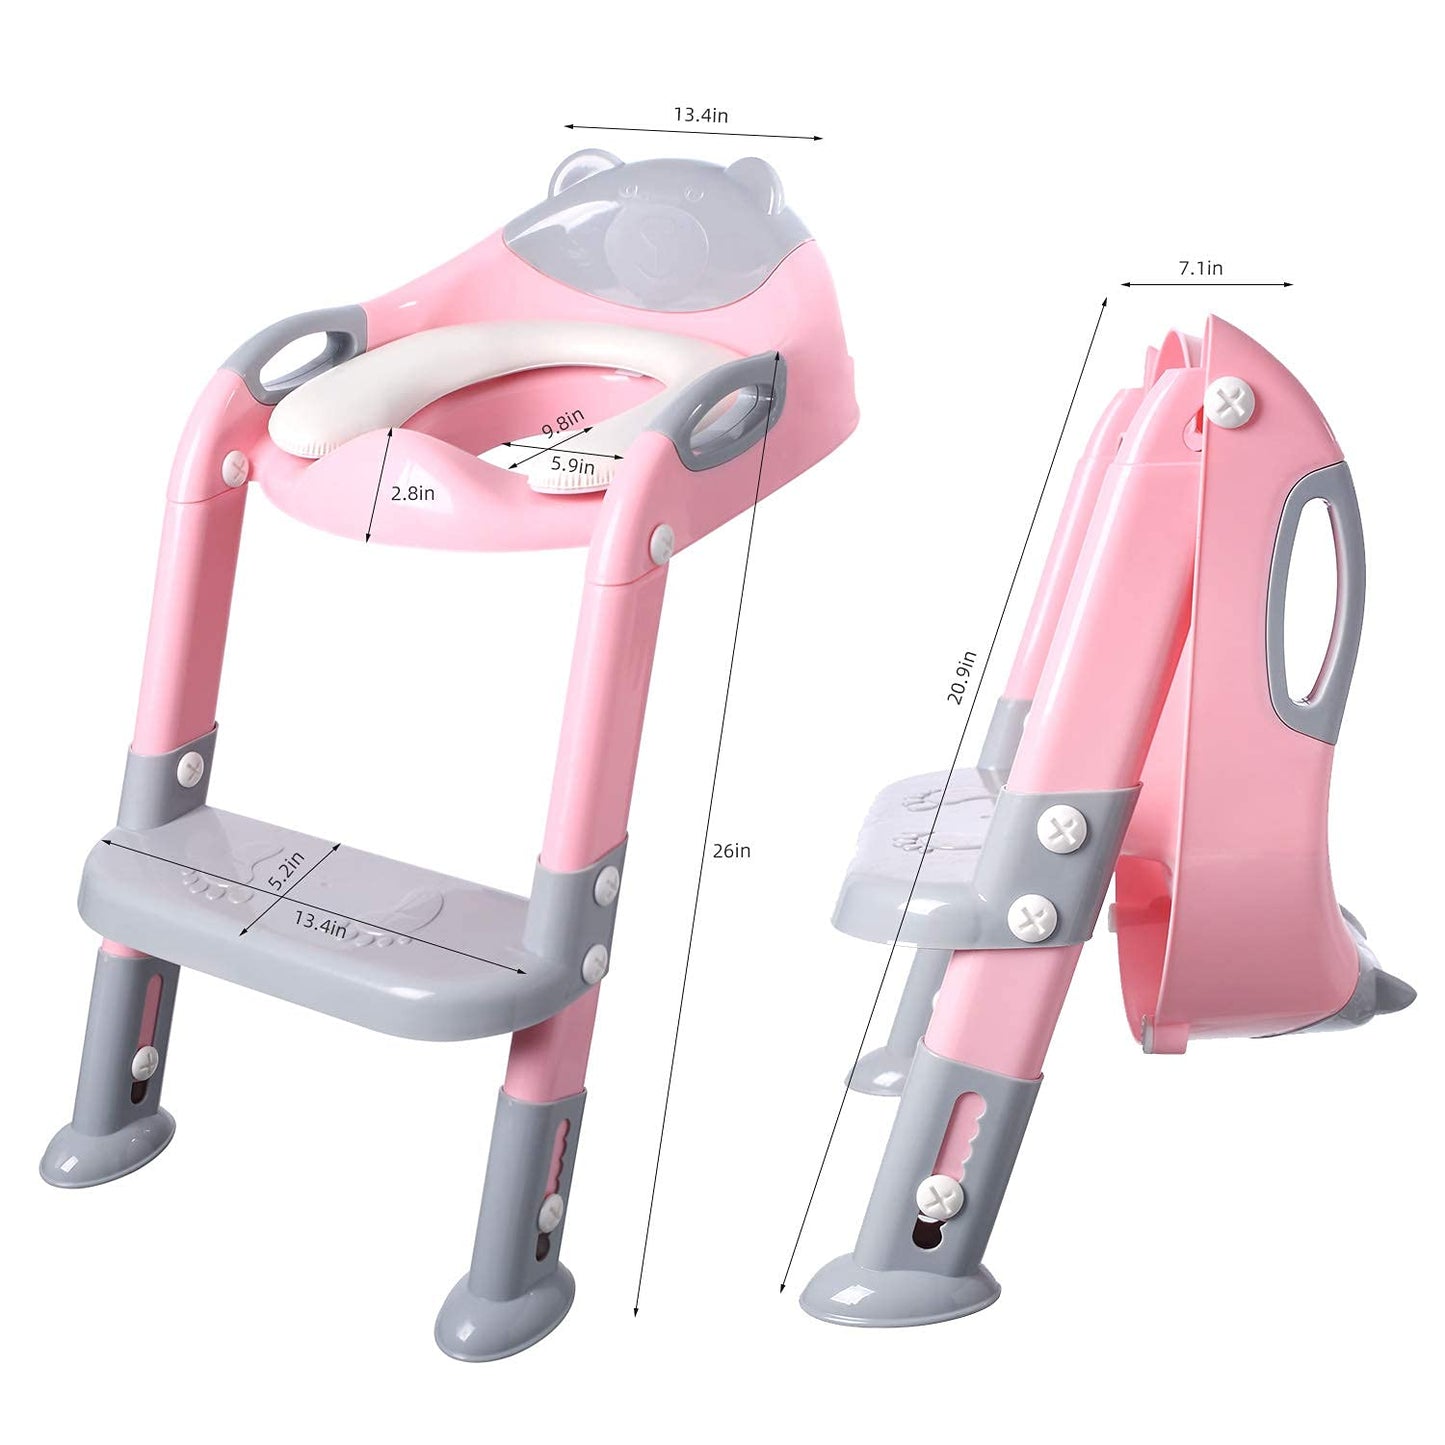 Mspyls Potty Training Seat Ladder Girls, Toddlers Potty Chair Potty Seat, Kids Potty Training Toilet Seat with Ladder Fedicelly (Gray/Pink)